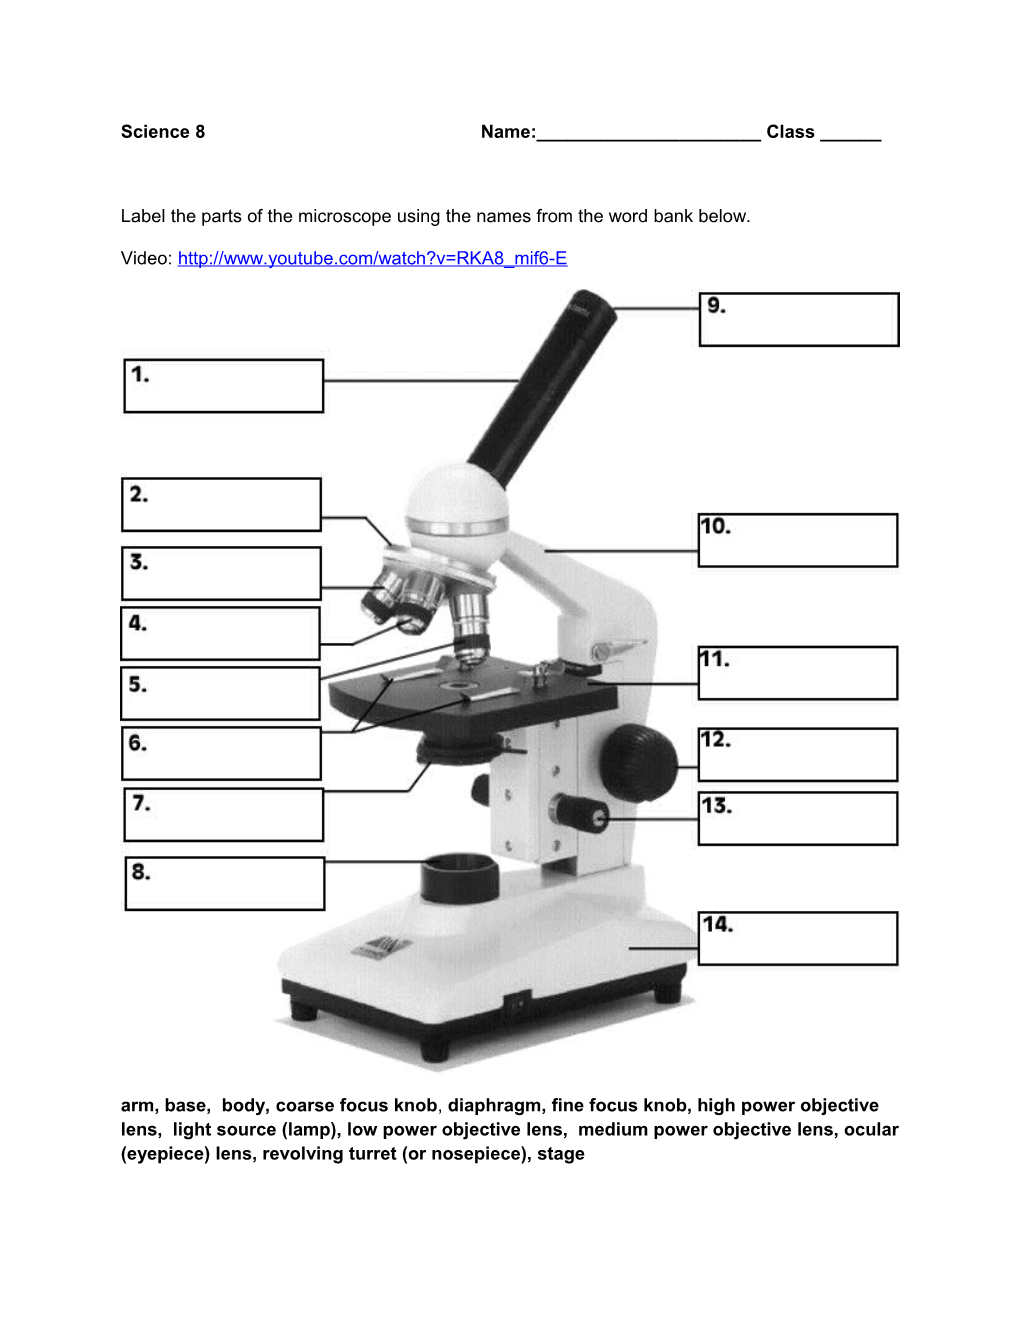 Write the Name of Each Part of the Microscope to Match the Descriptions Below